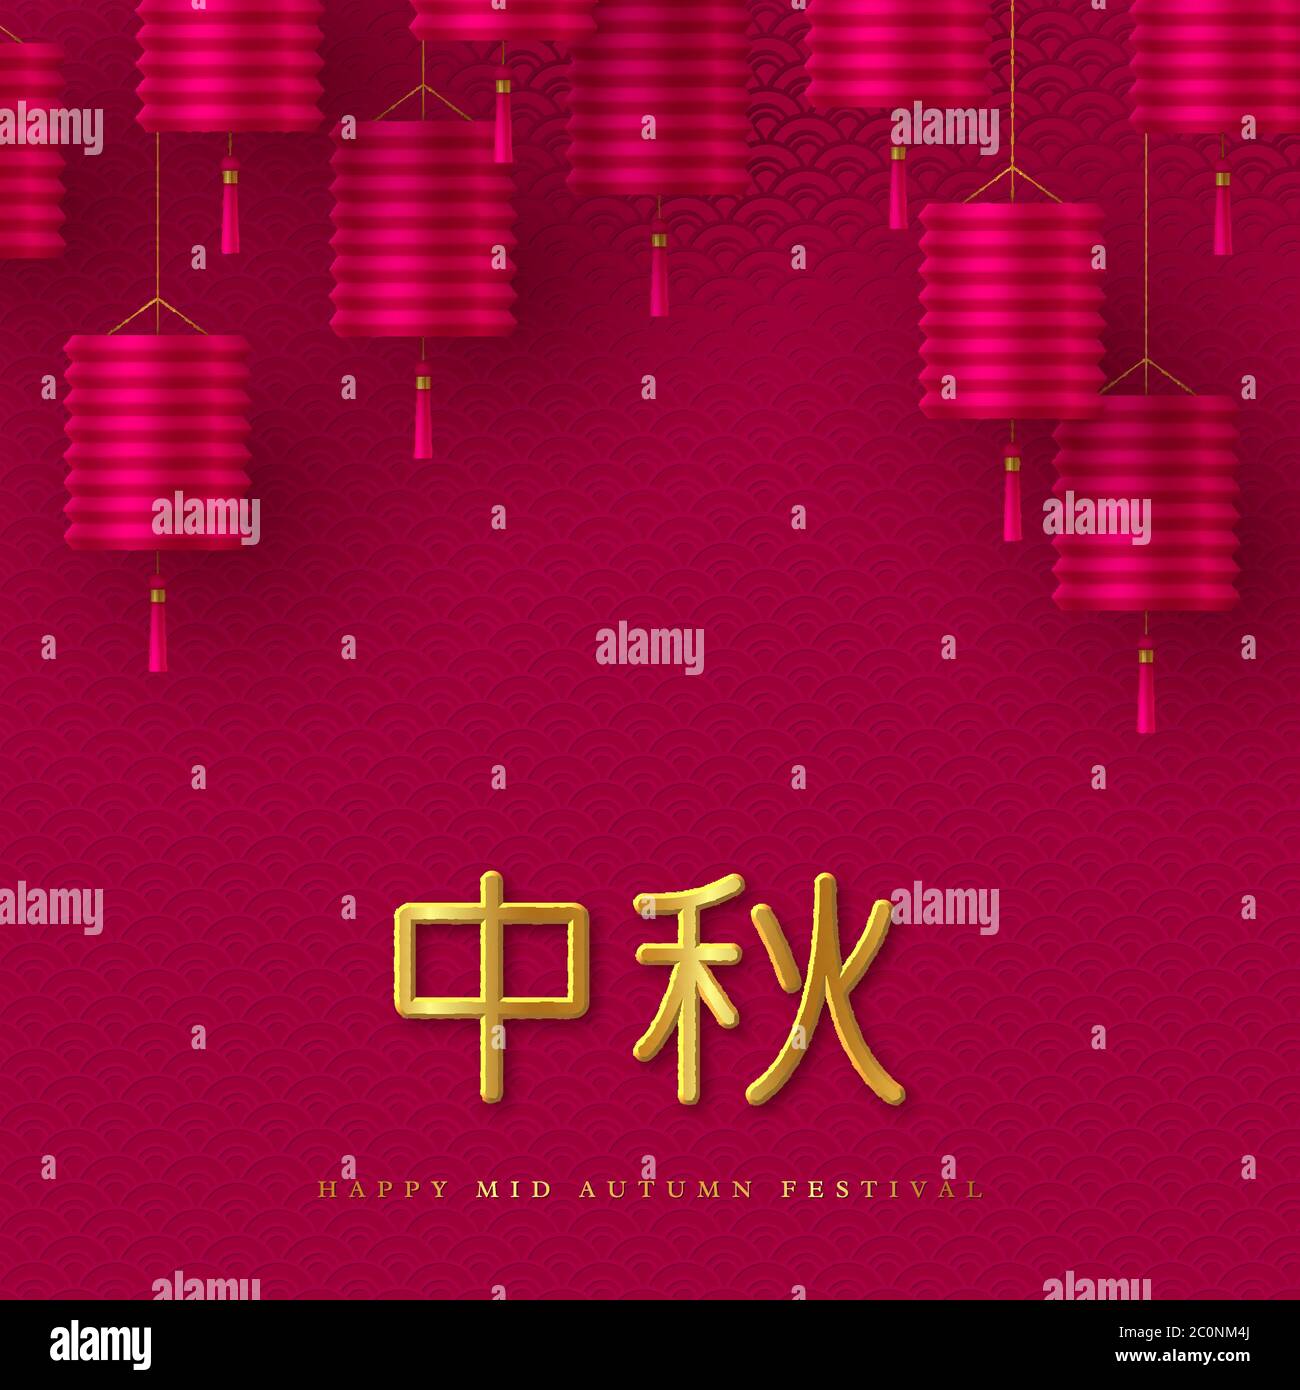 Chinese mid autumn typographic design. Realistic 3d lanterns and traditional pattern. Chinese golden calligraphy translation - Mid Autumn, vector Stock Vector